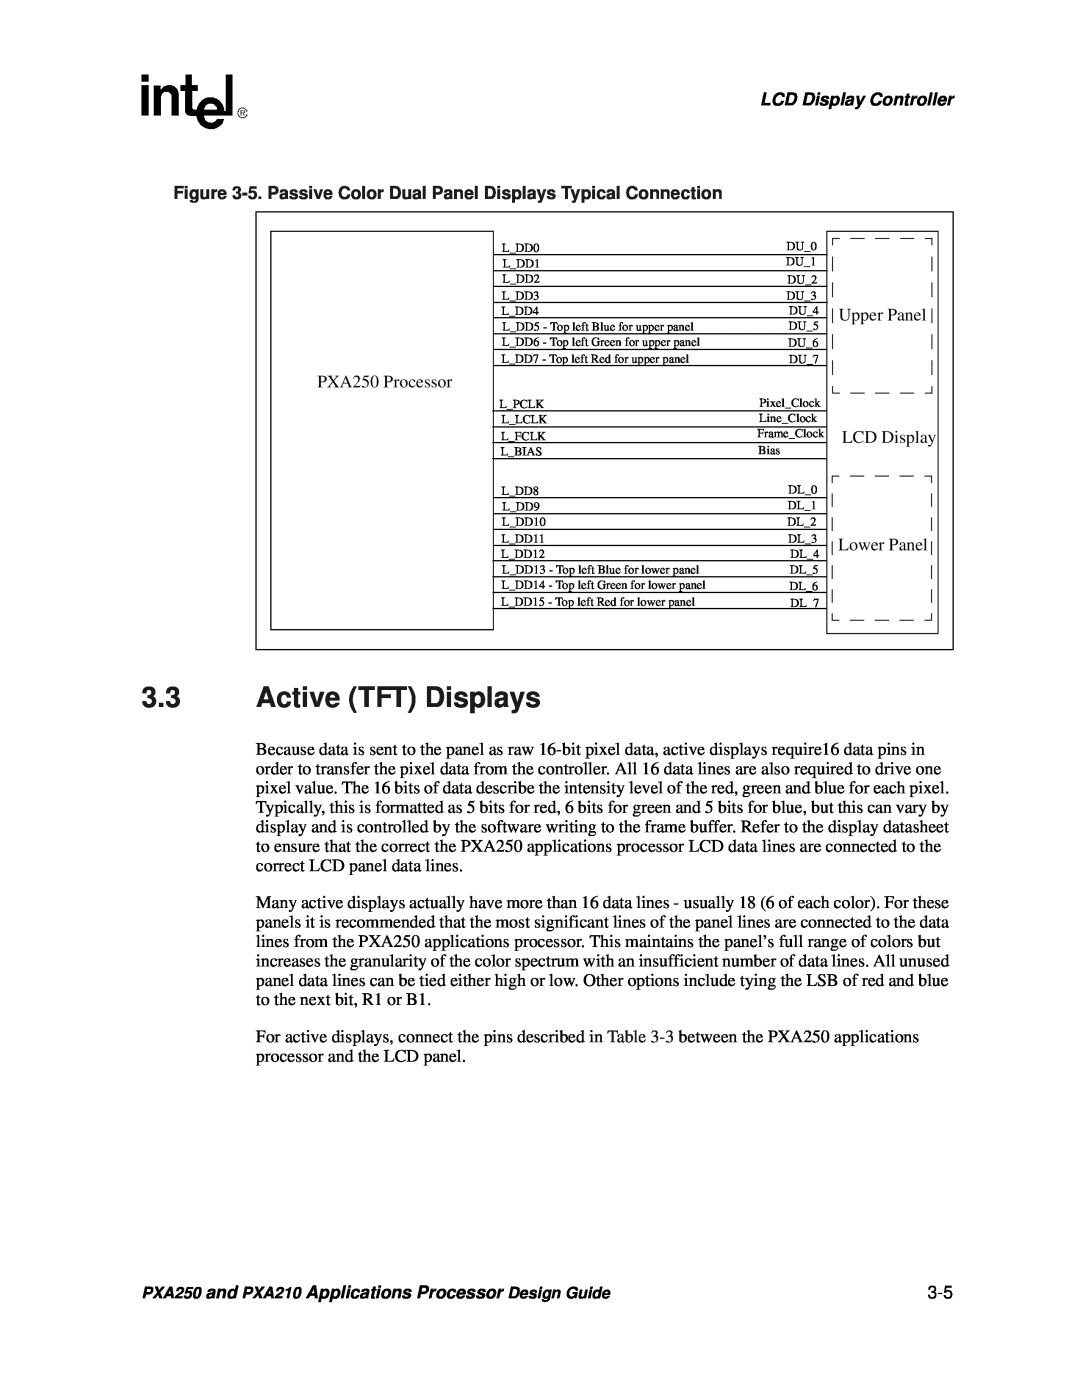 Intel manual Active TFT Displays, LCD Display Controller, PXA250 and PXA210 Applications Processor Design Guide 